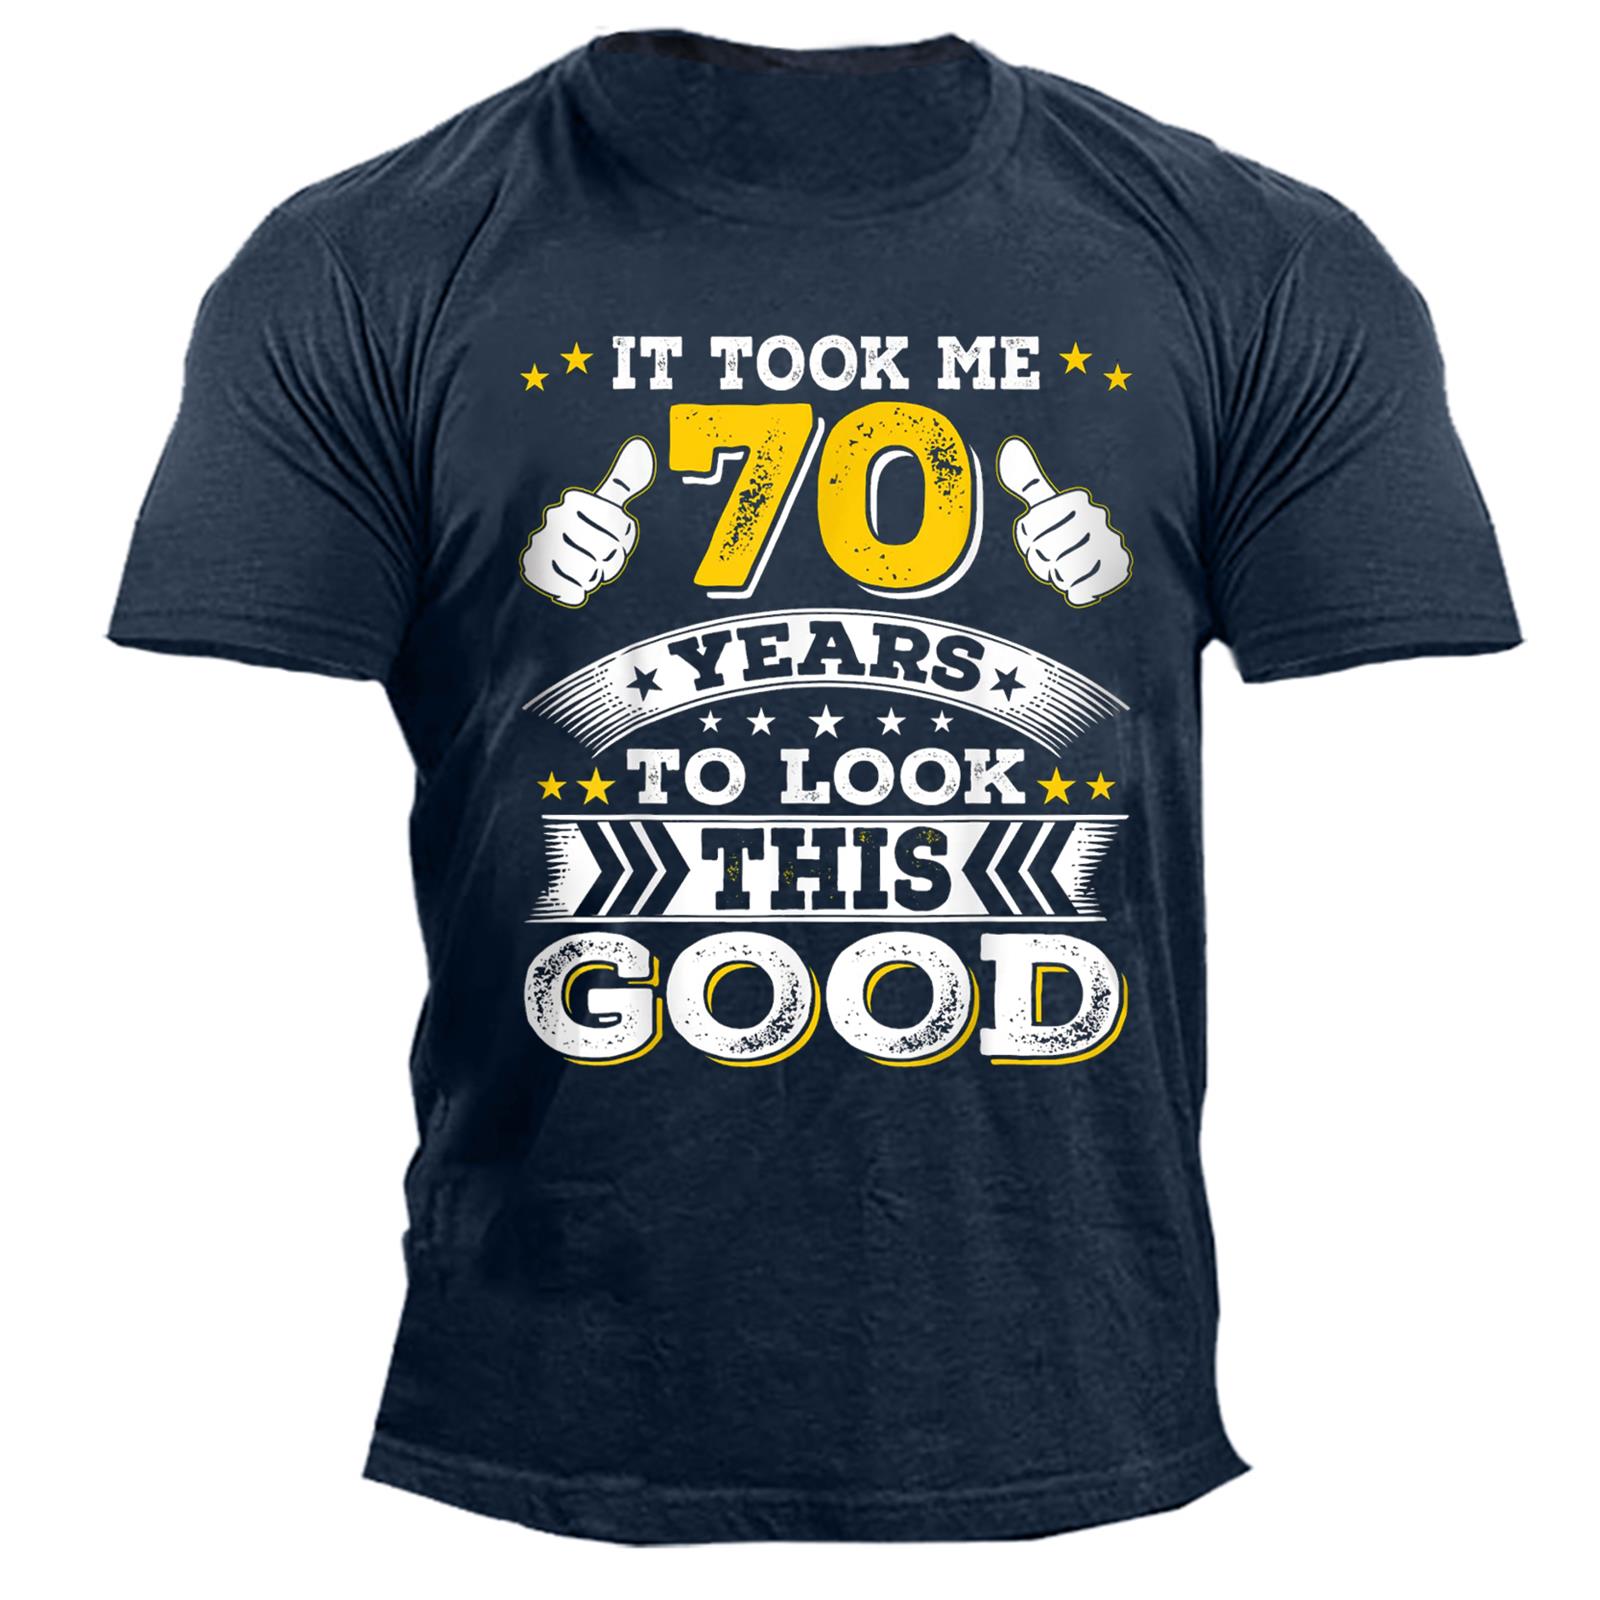 Men's Took Me 70 Chic Years To Look This Good Print Cotton T-shirt